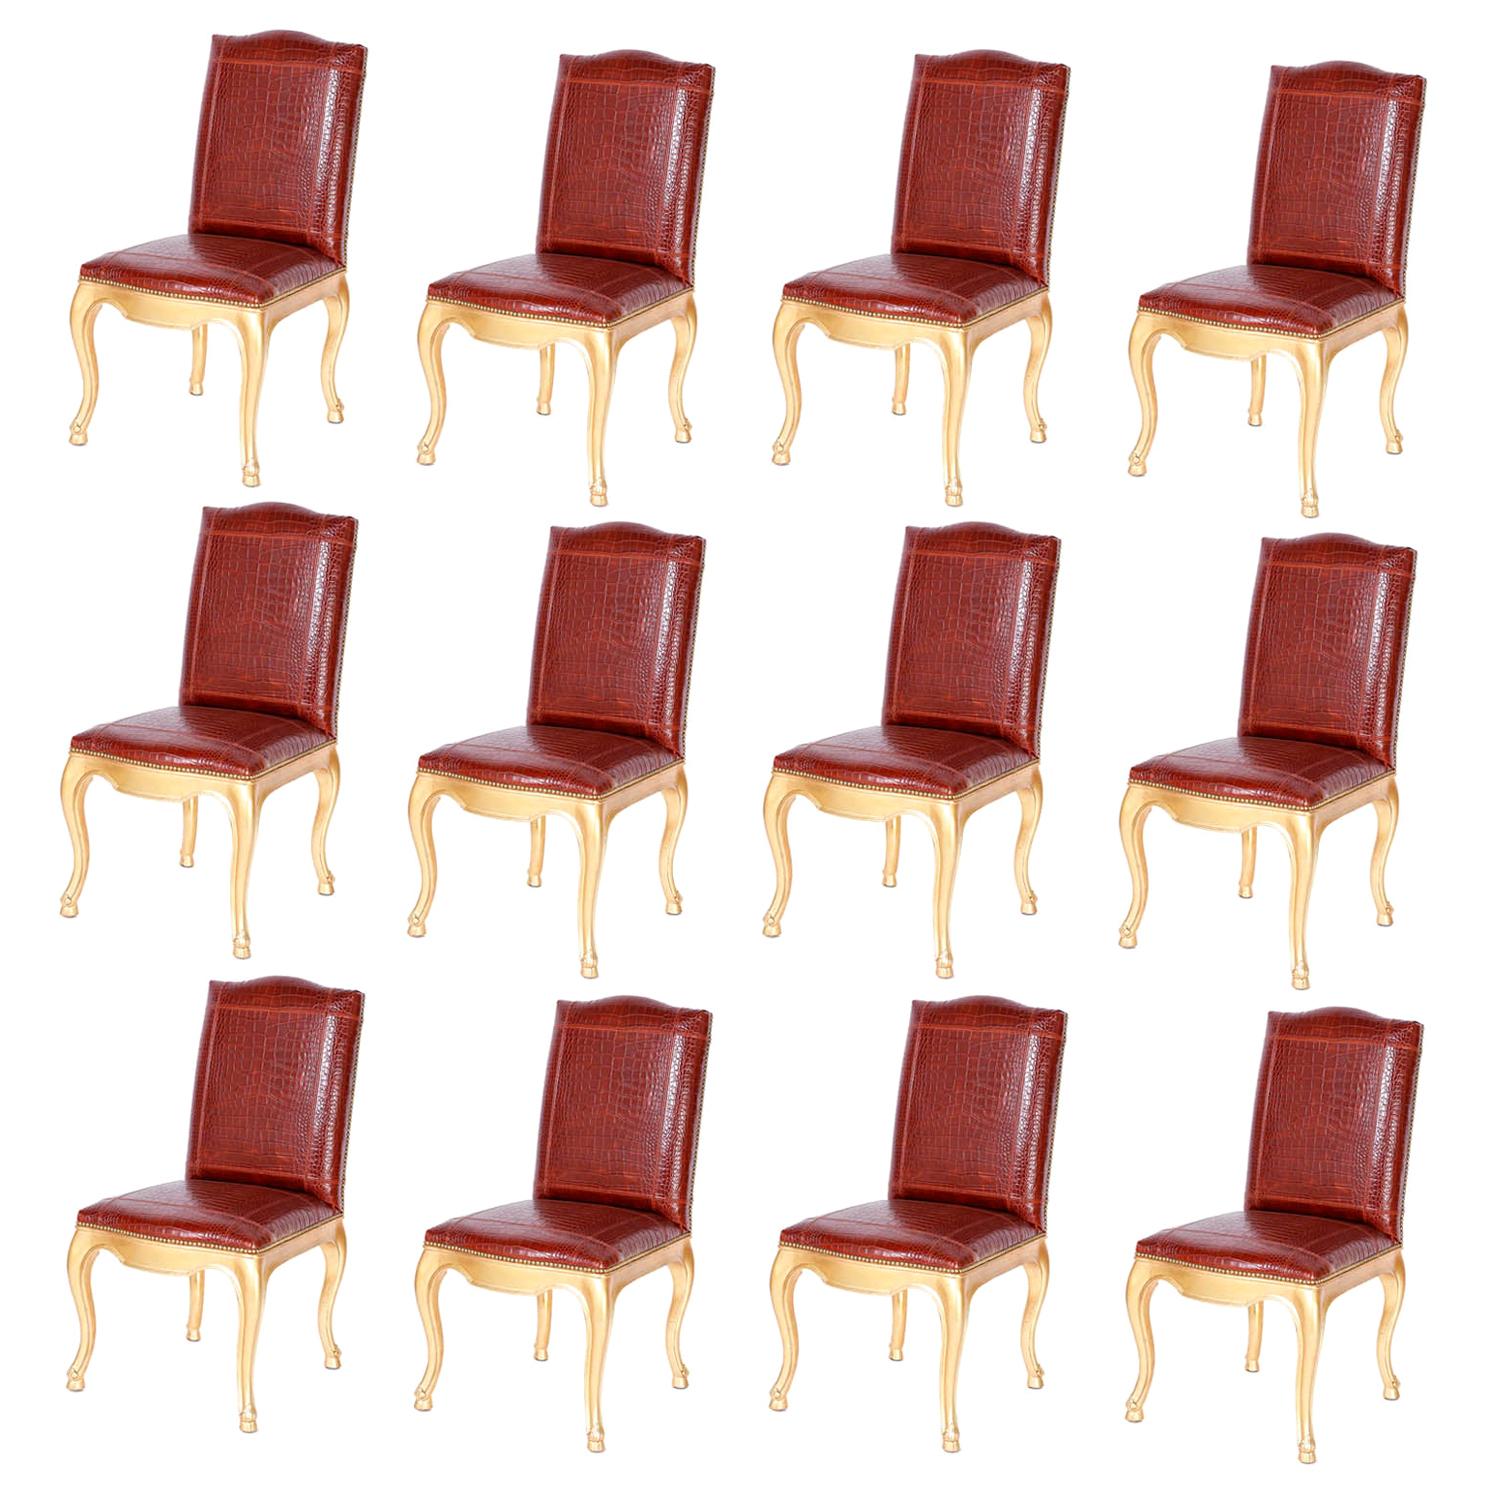 Set of Twelve Dining Chairs with Faux Alligator Upholstery by Ralph Lauren